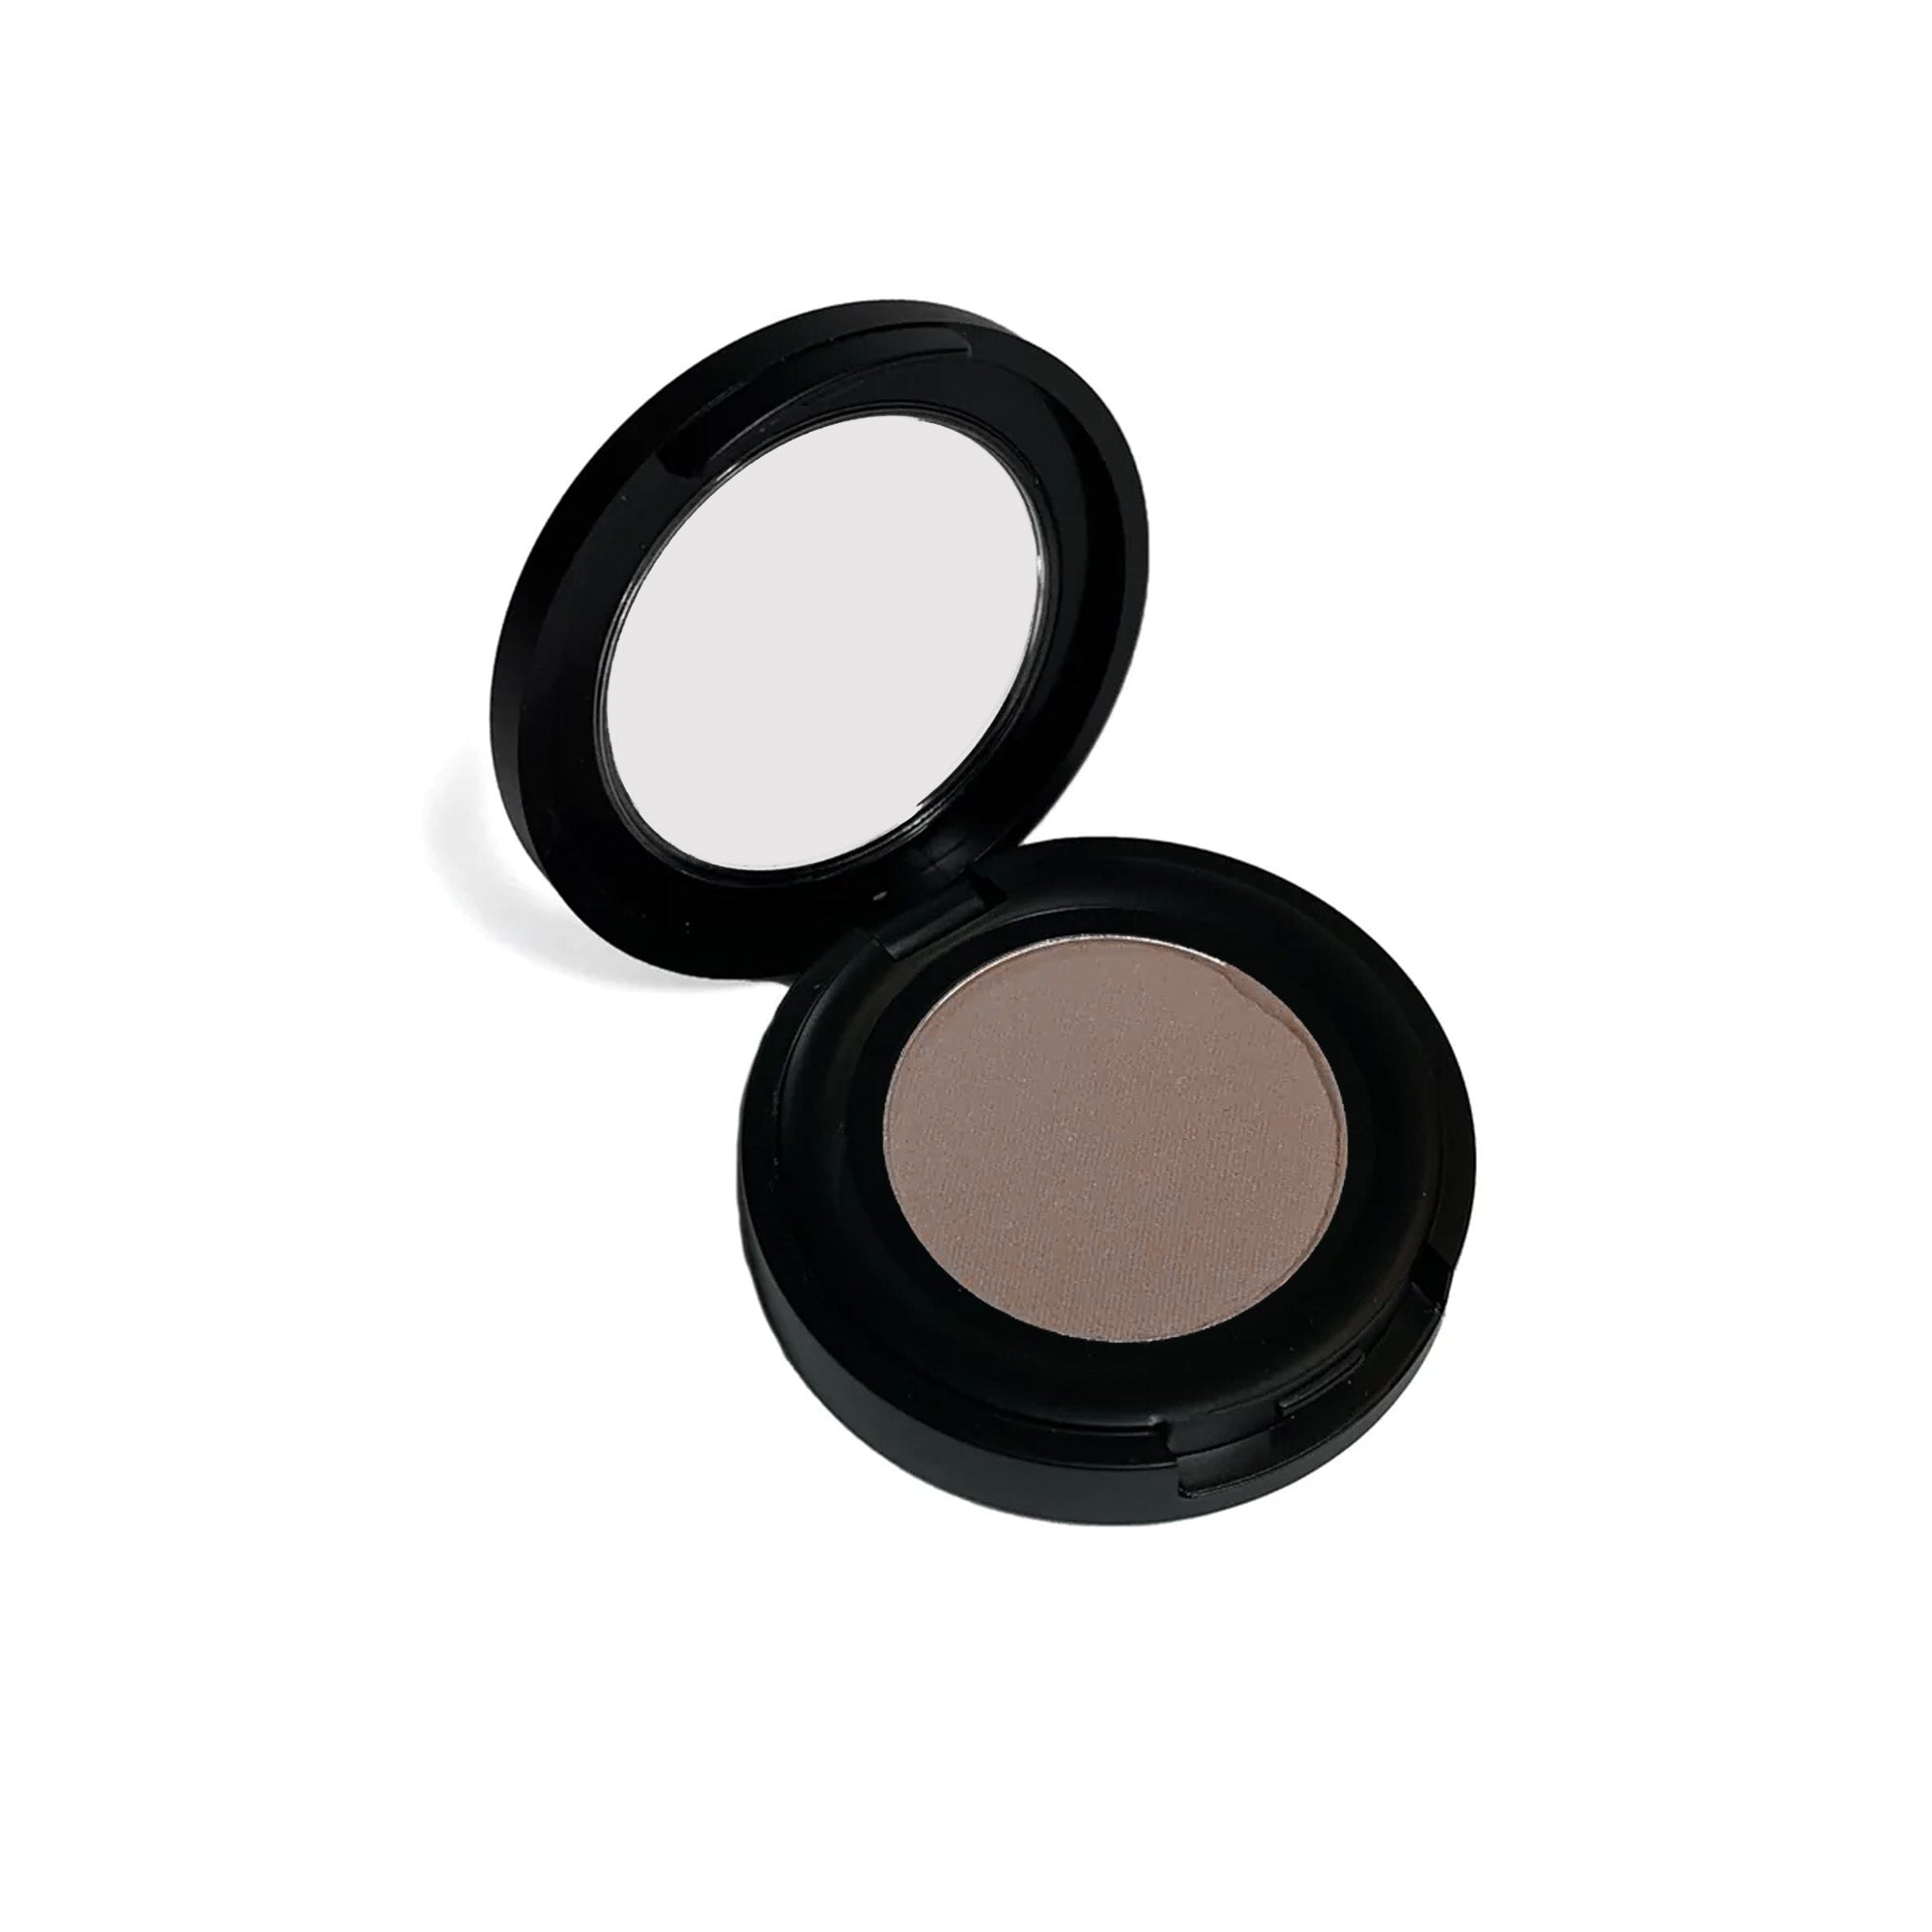 eyebrow-powder-taupe-withSimplicity